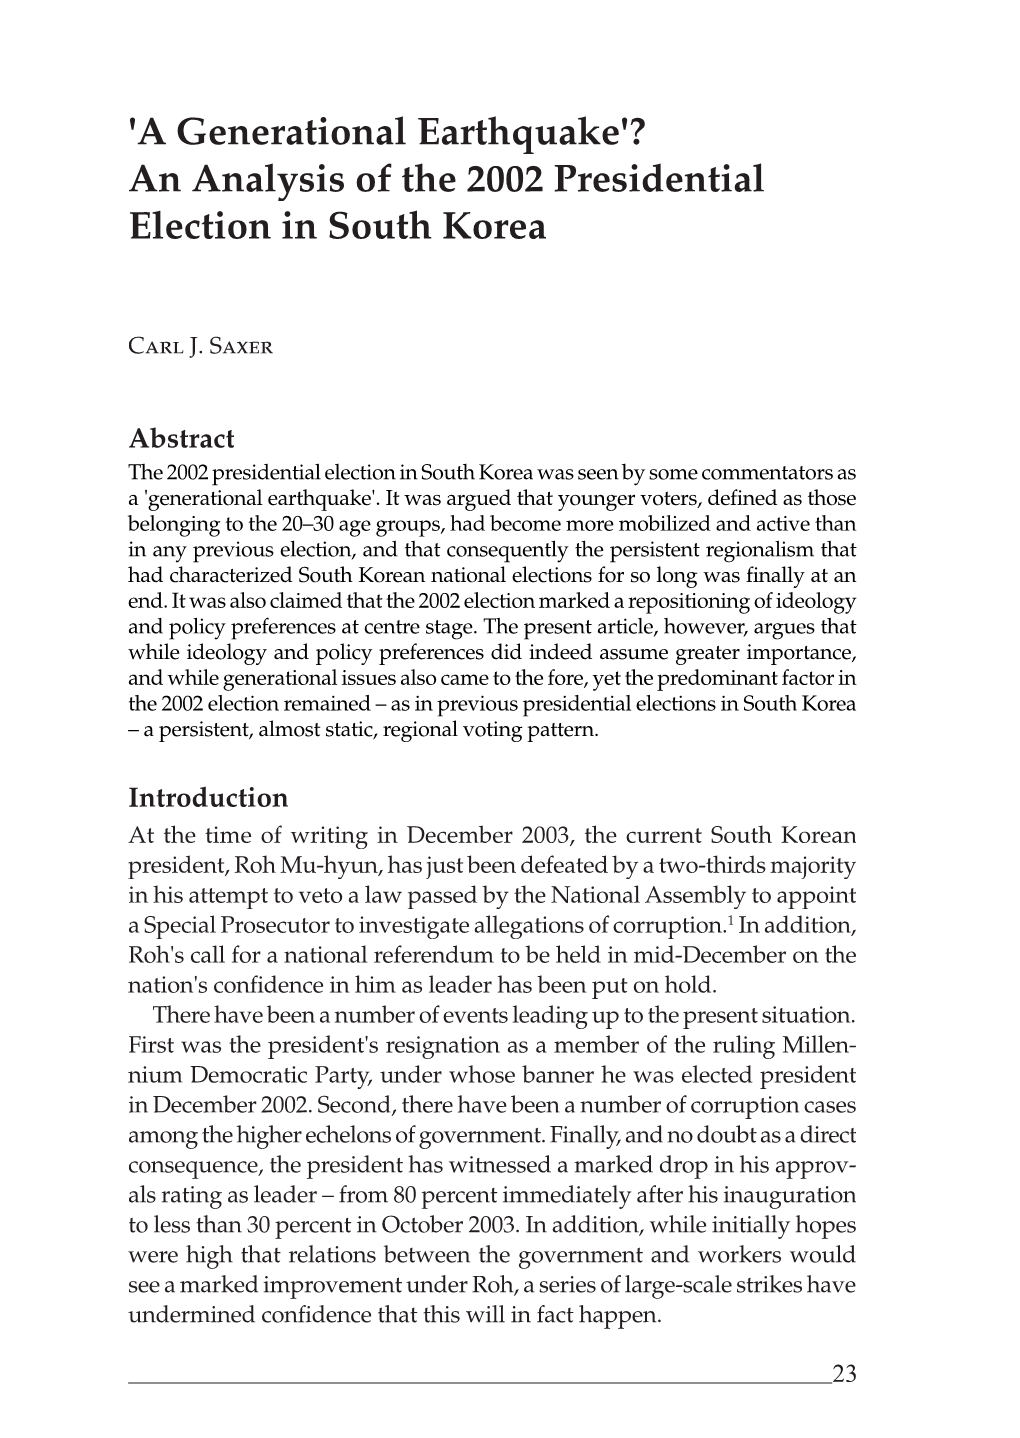 An Analysis of the 2002 Presidential Election in South Korea